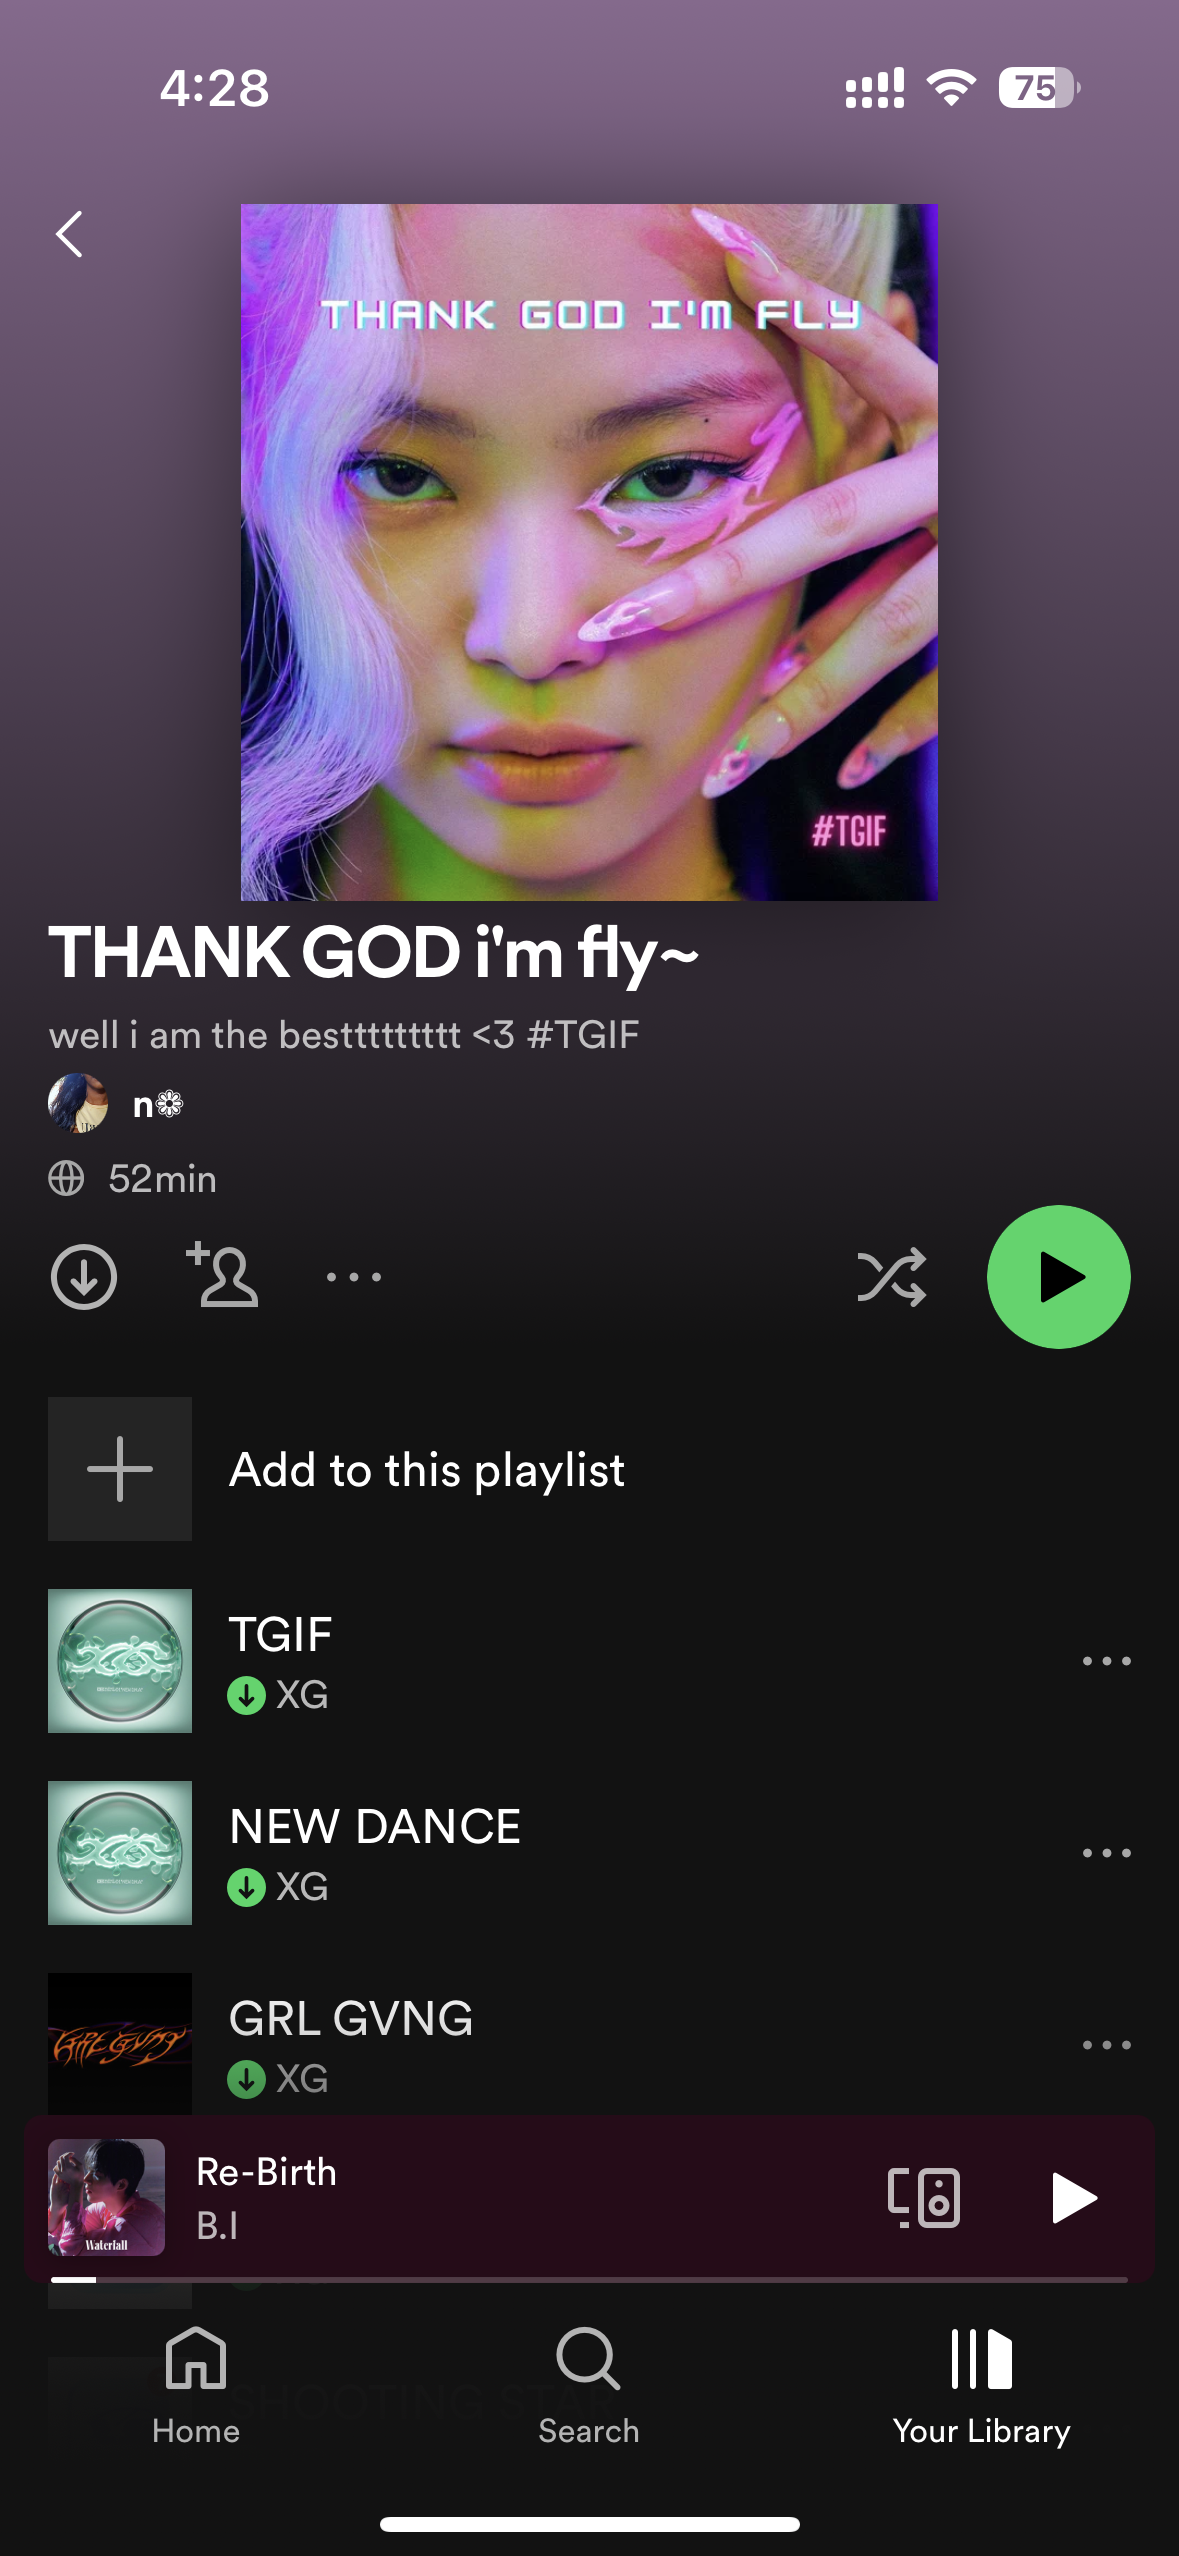 POST YOUR PLAYLIST! - Page 7 - The Spotify Community